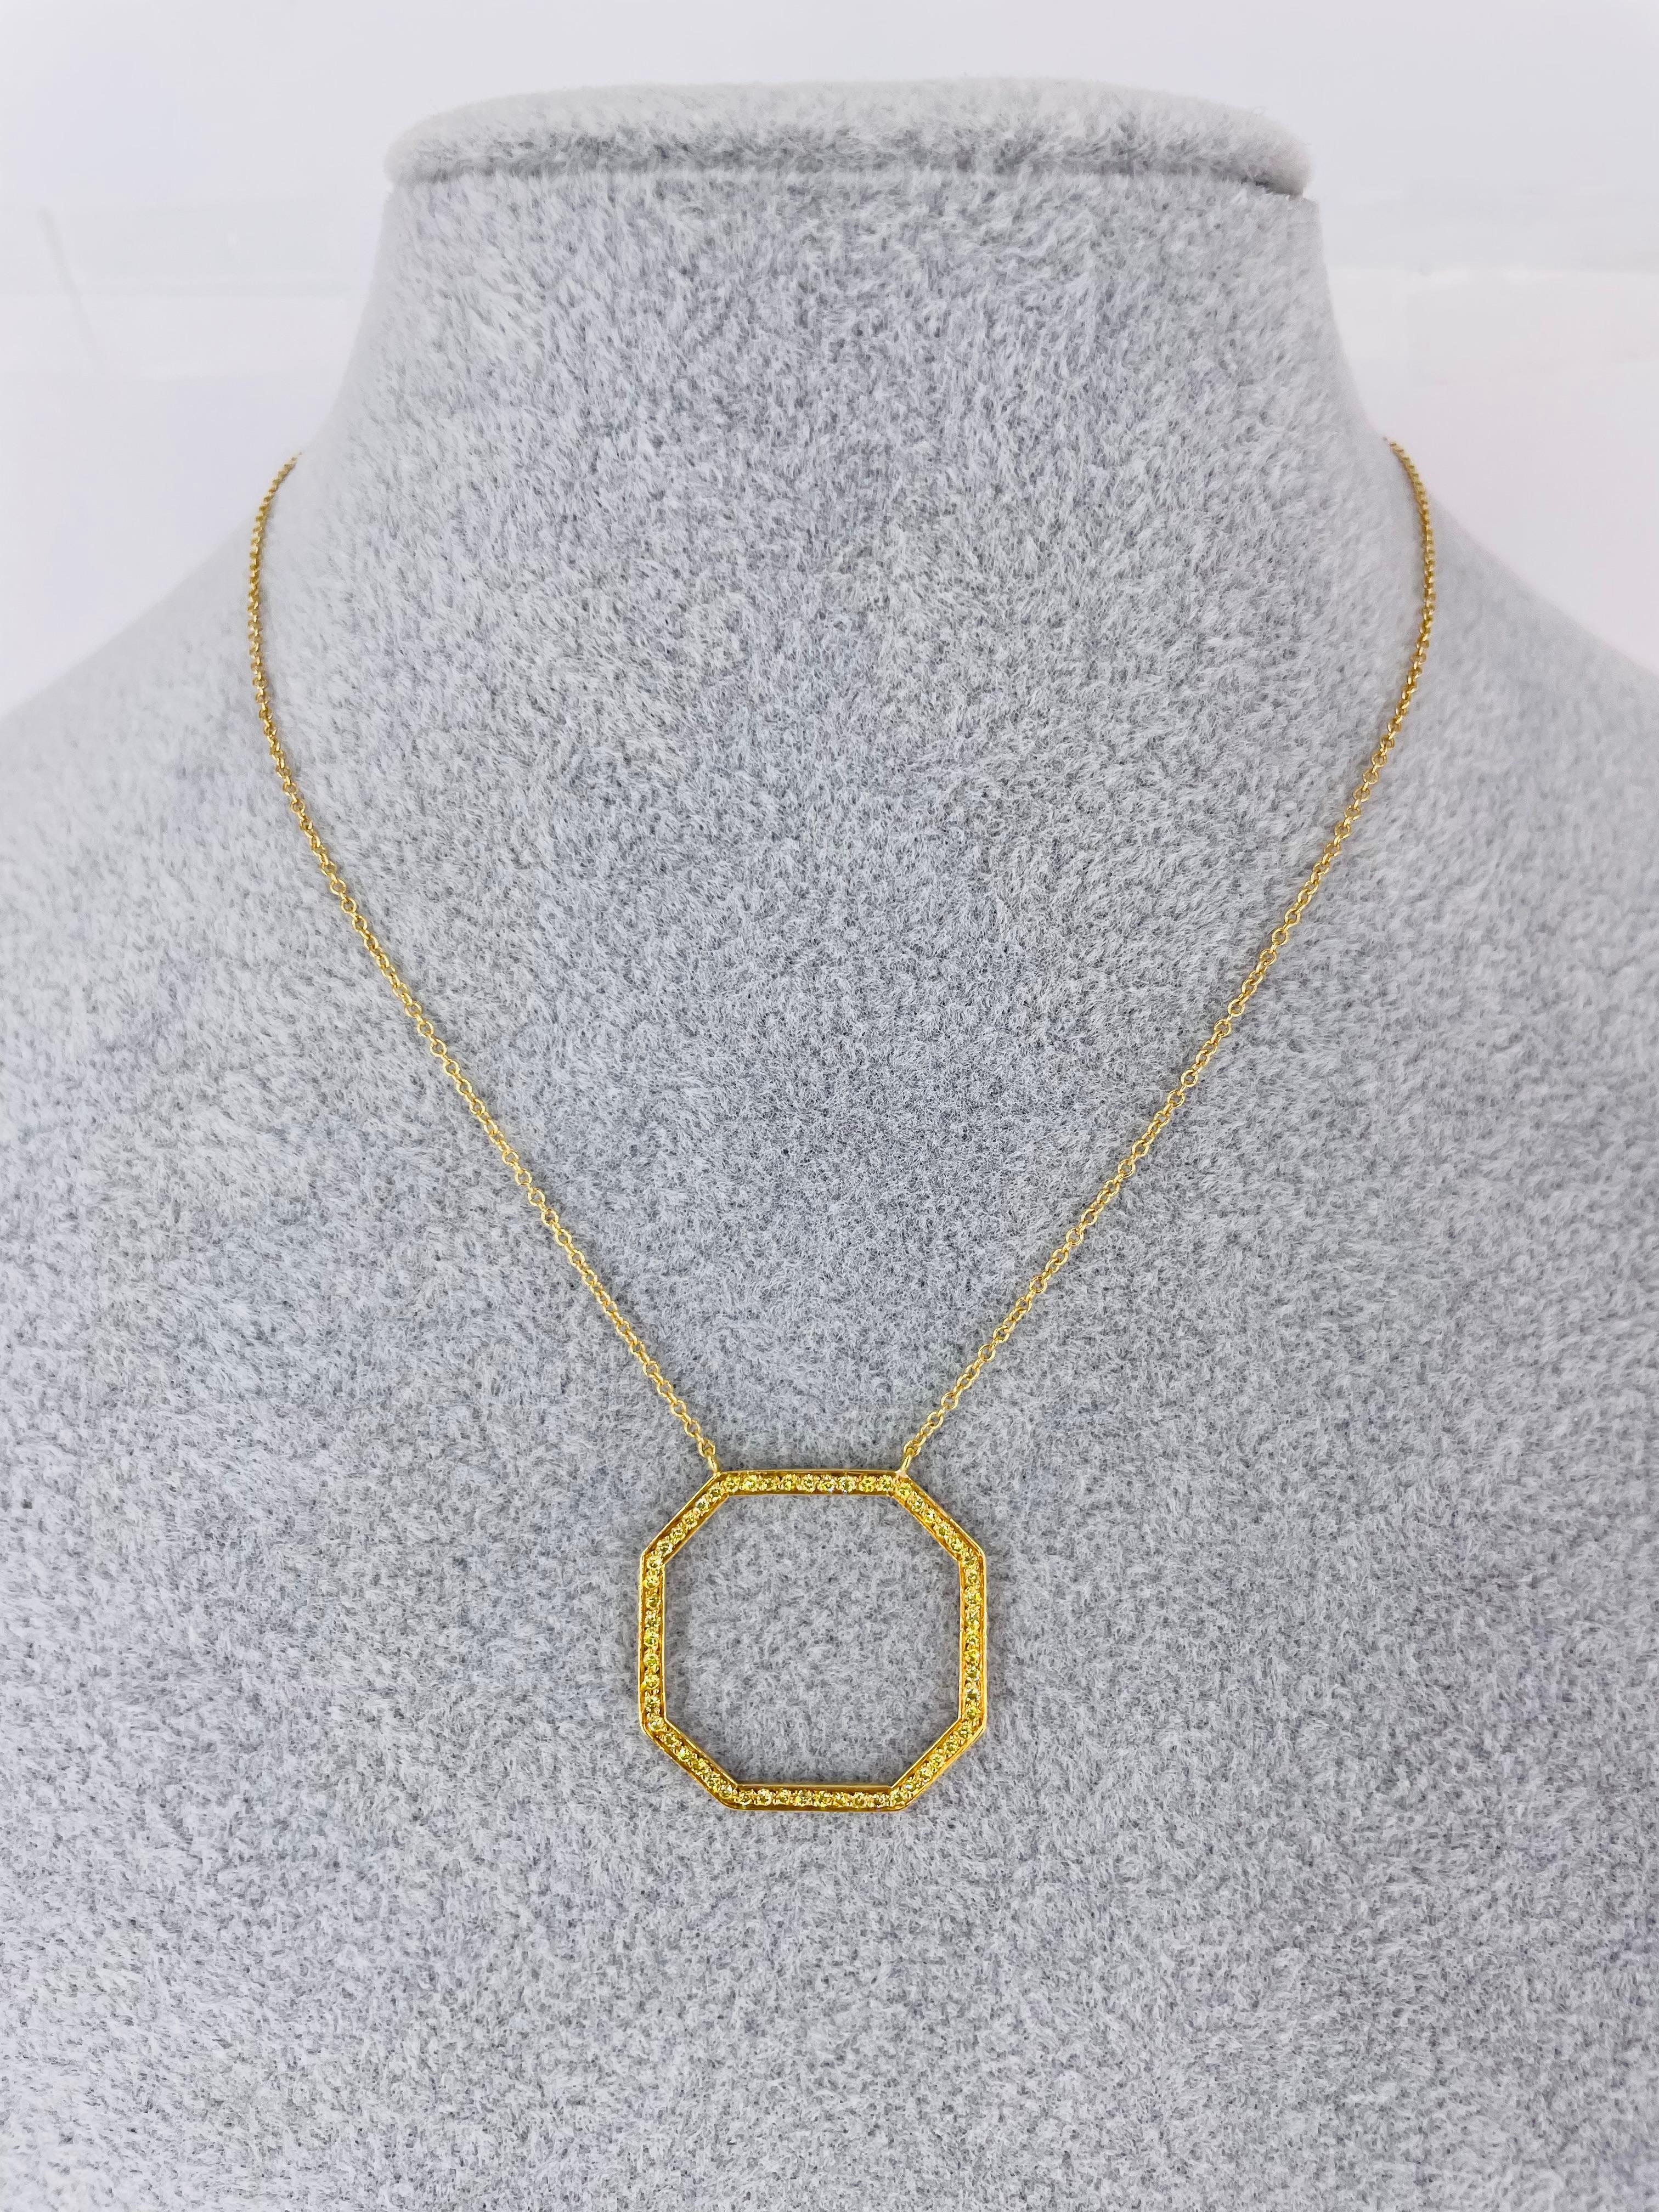 This sophisticated piece by J. Birnbach is a sleek outline of an octagon with 0.18ctw fancy intense yellow diamonds. The octagon pendant is attached to the chain so it will always lay flat and straight on the wearer. The pendant and chain are